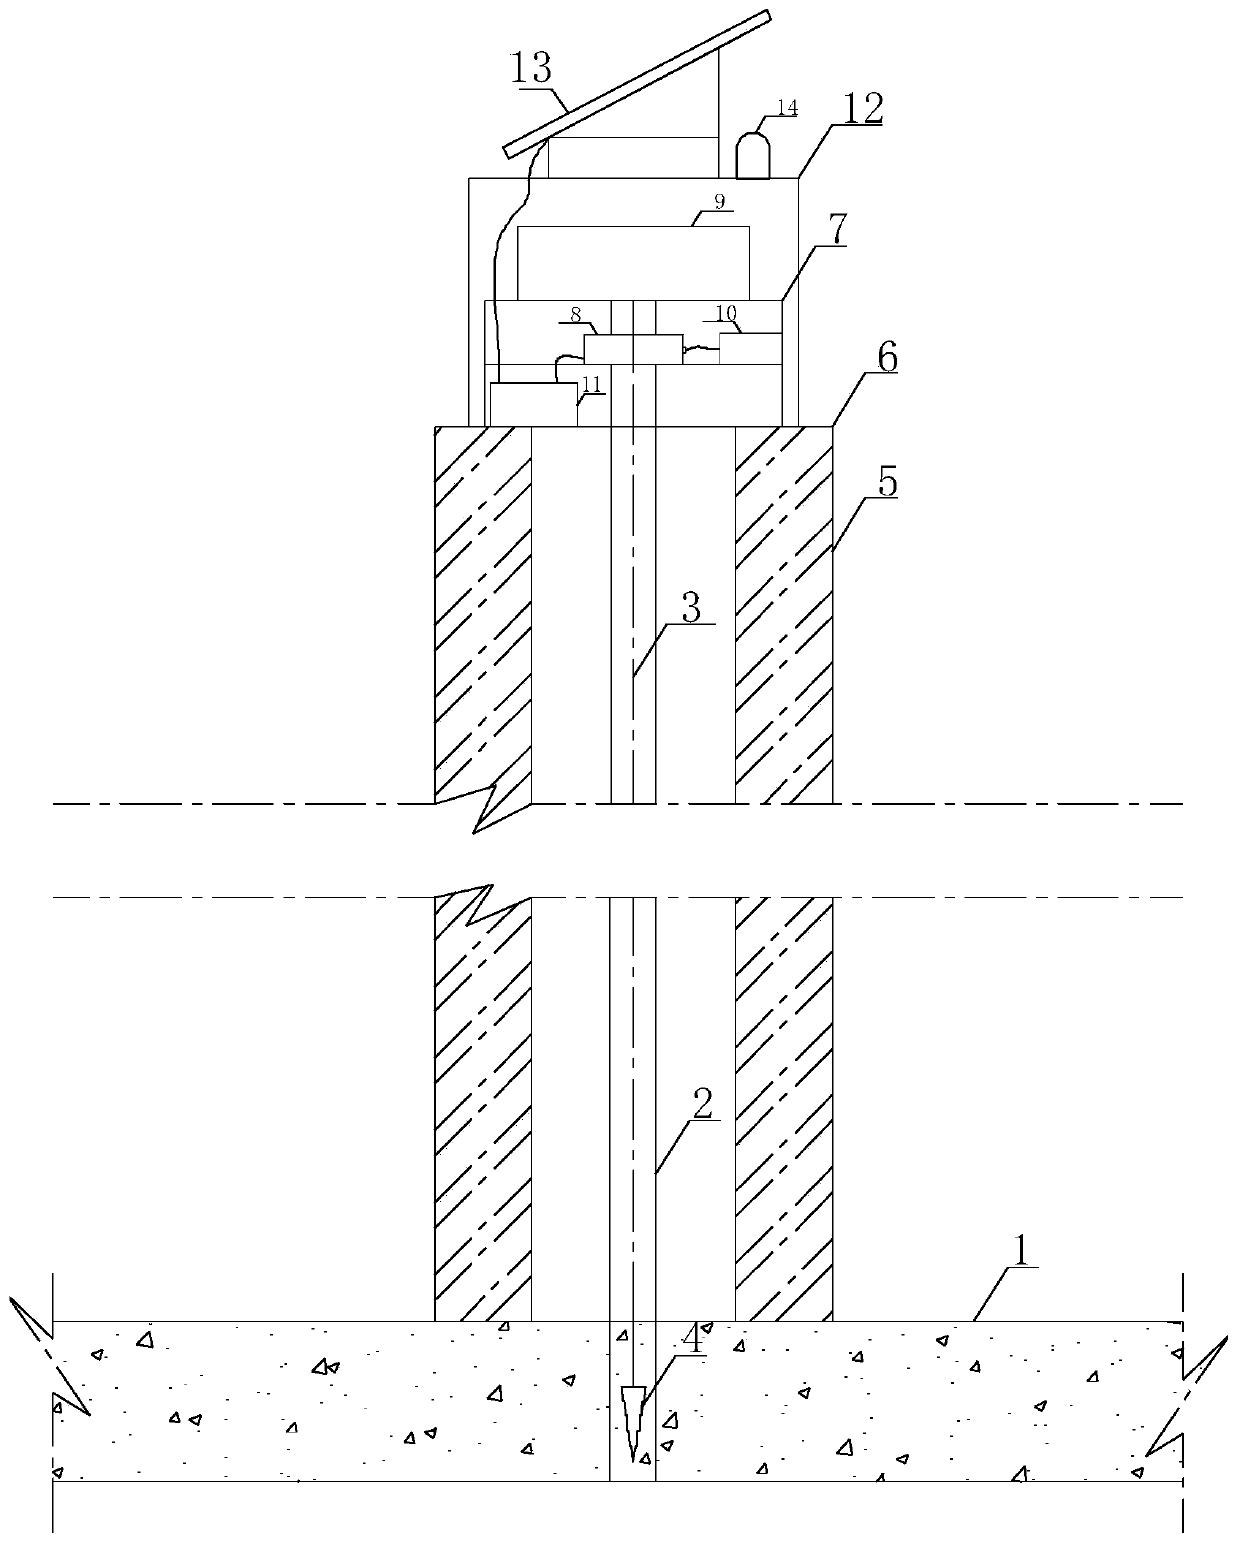 Buckle tower deviation monitoring device